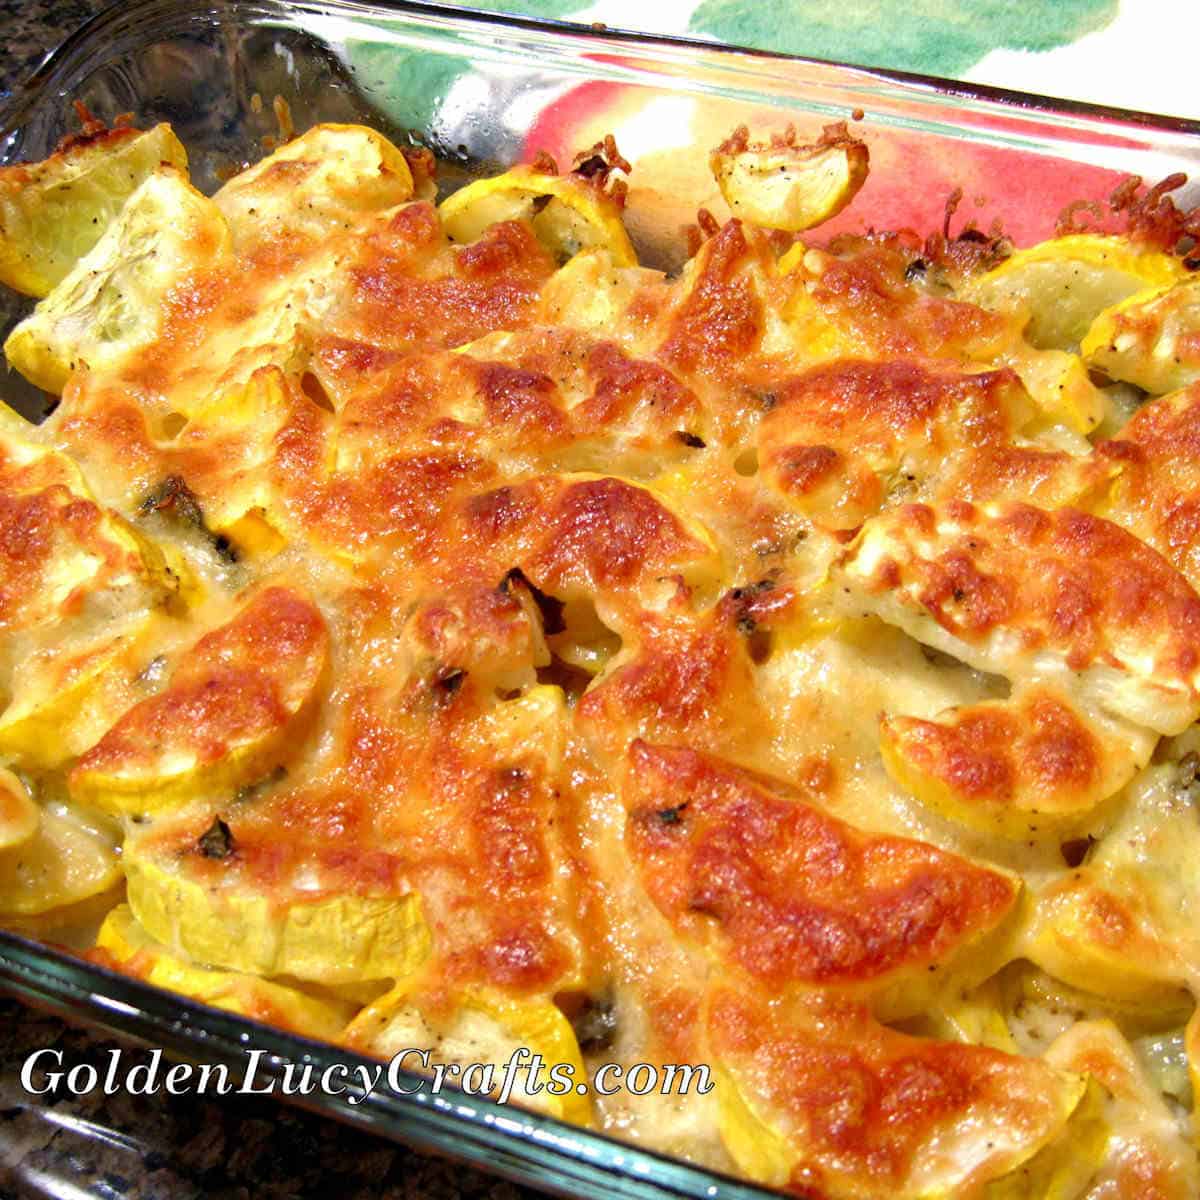 Baked yellow squash with cheese in baking dish.